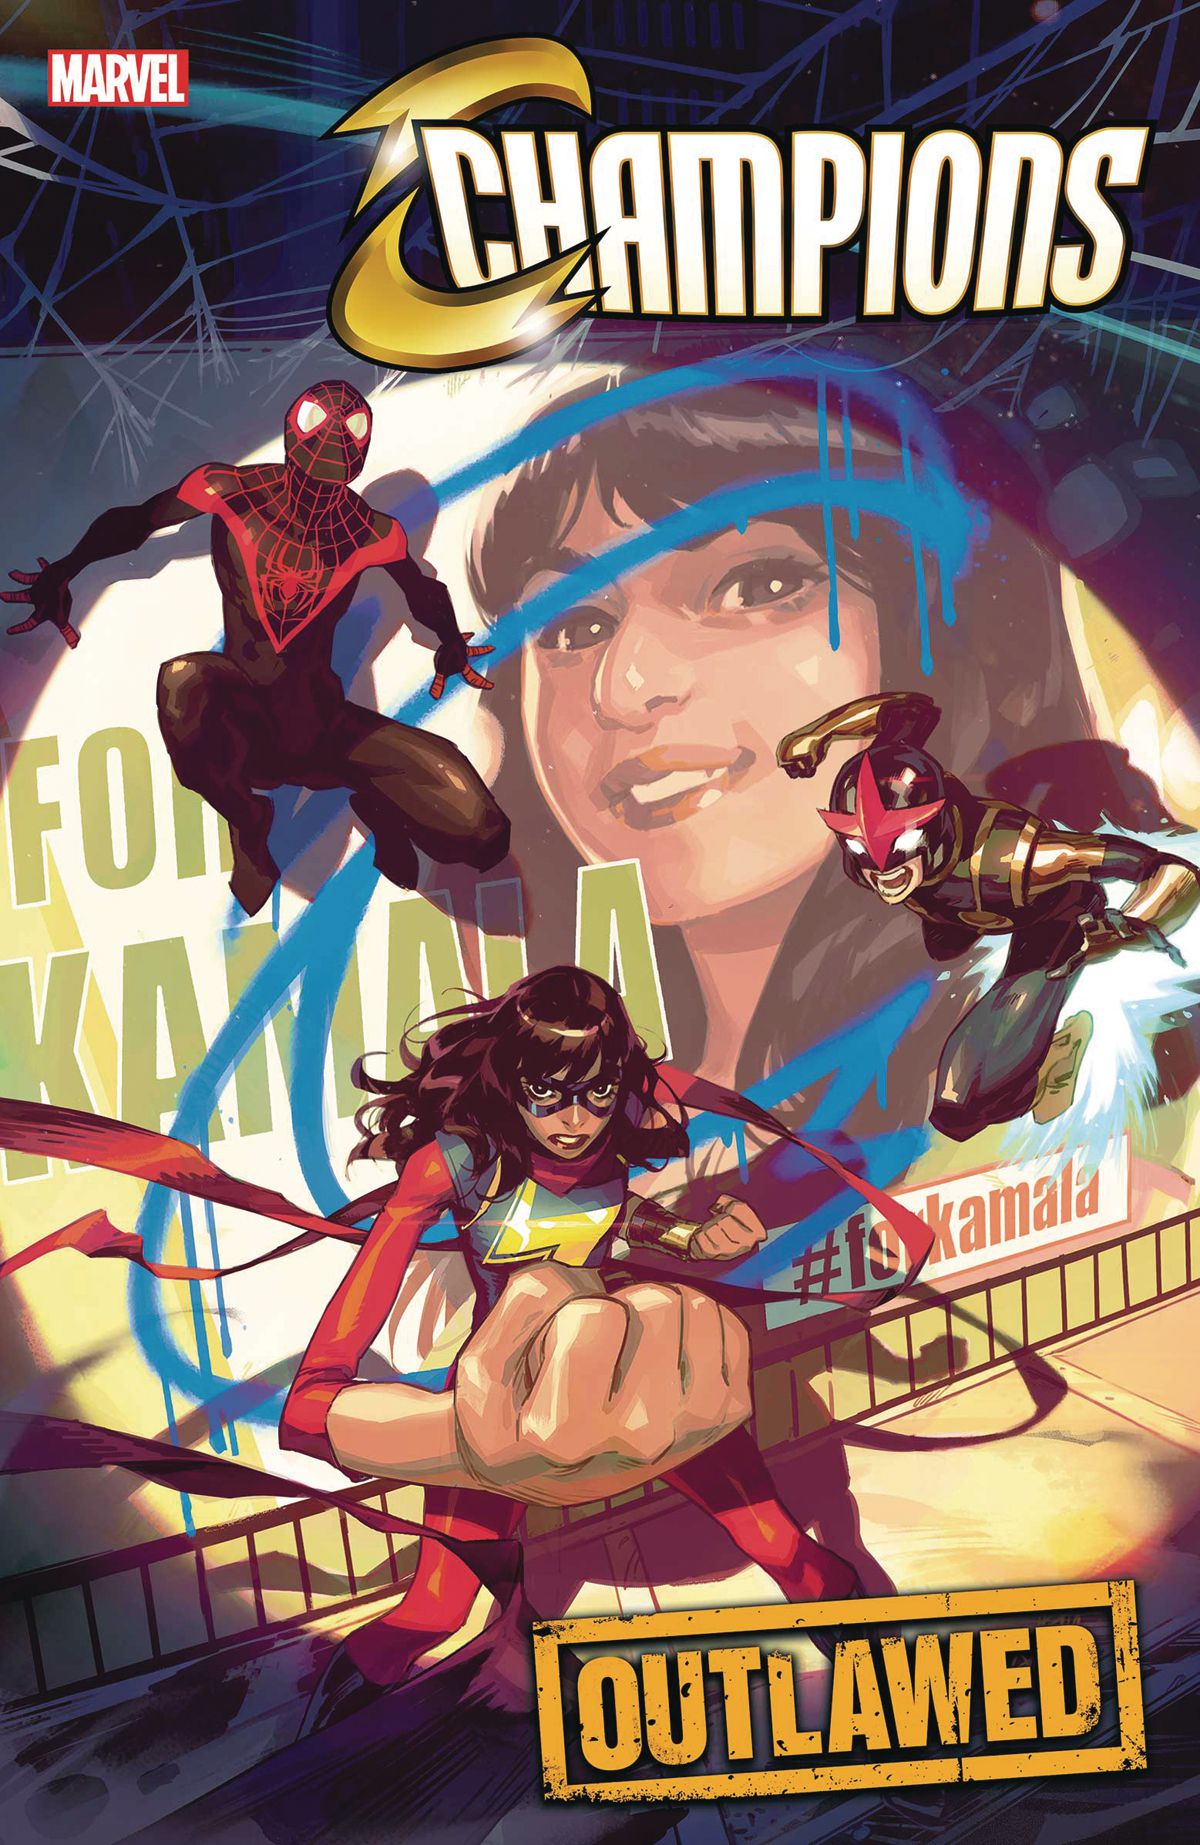 Miles Morales/Spider-Man, Ms. Marvel, and Nova pose under a spotlight and in front of a billboard in favor of Kamala’s Law, on the cover of Champions #1, Marvel Comics (2020). 